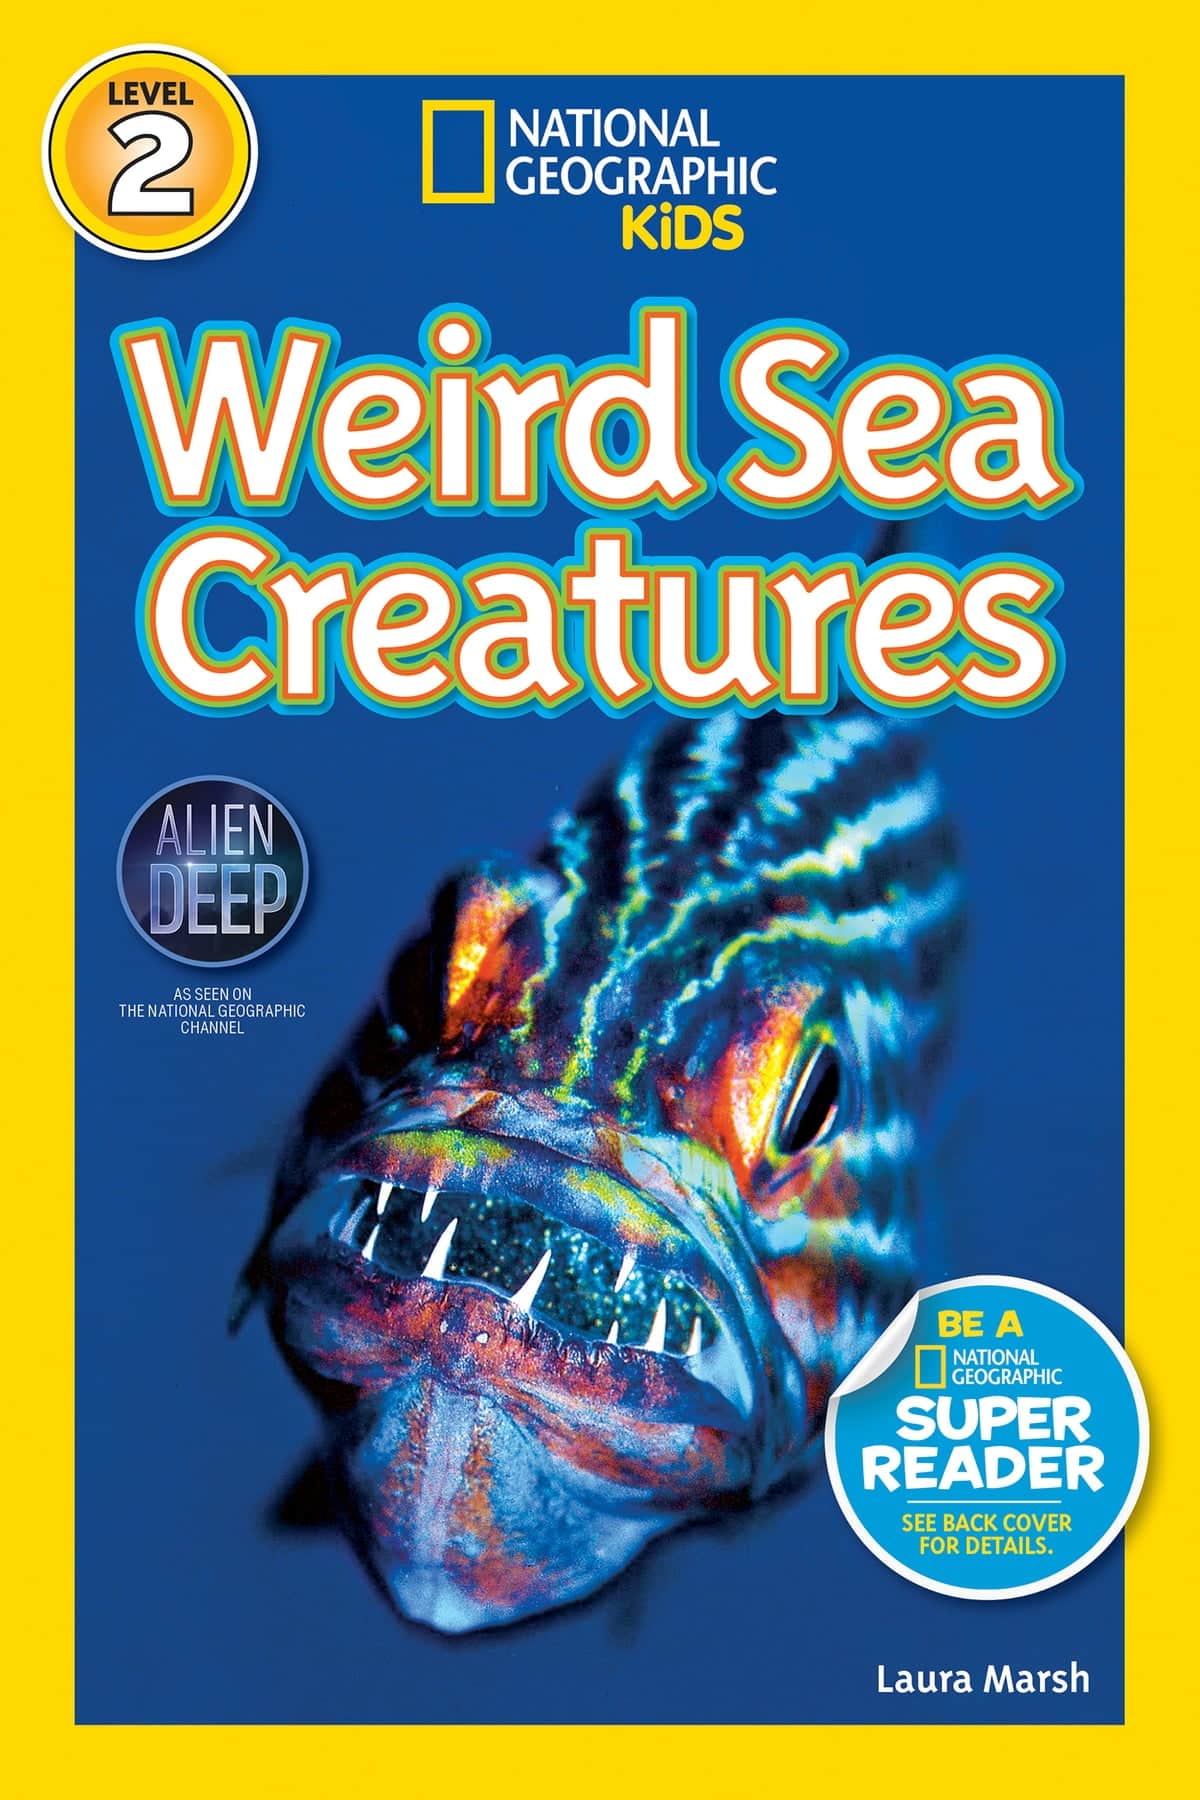 The cover for the book Weird Sea Creatures